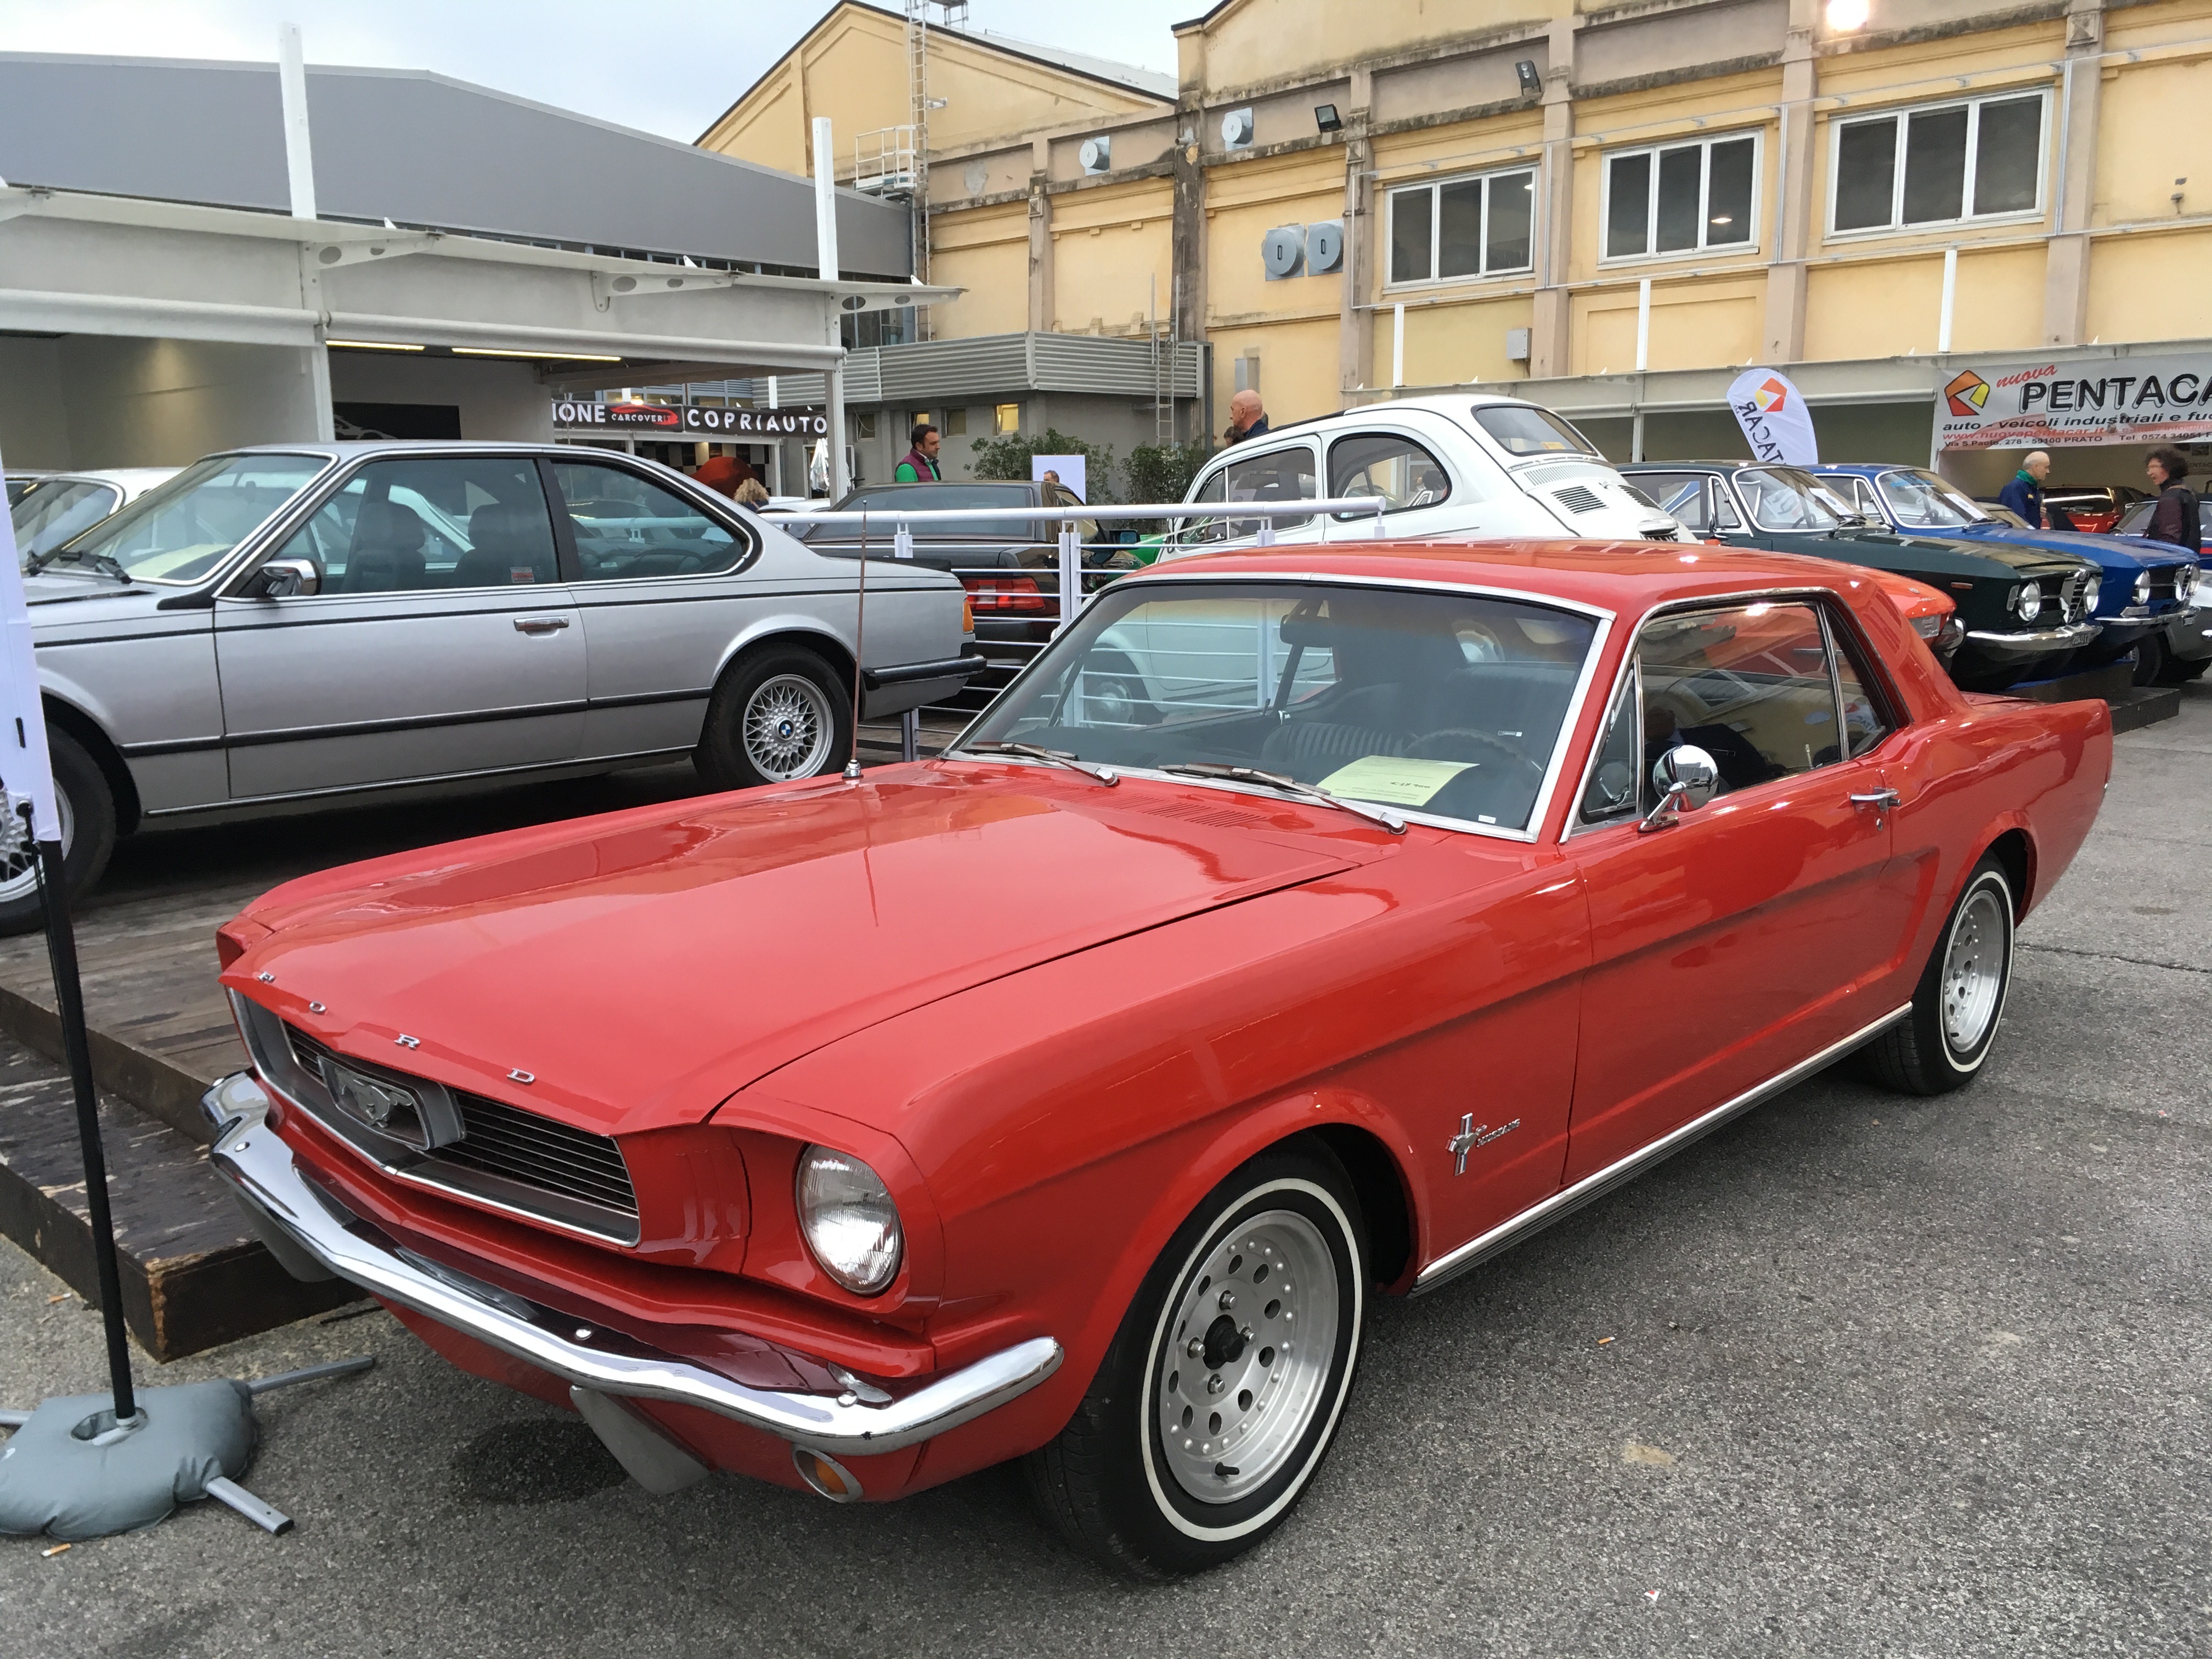 Fish-out-of-water 1966 Mustang with 6-cylinder engine asked €17,900 ($20,000). | William Hall photos